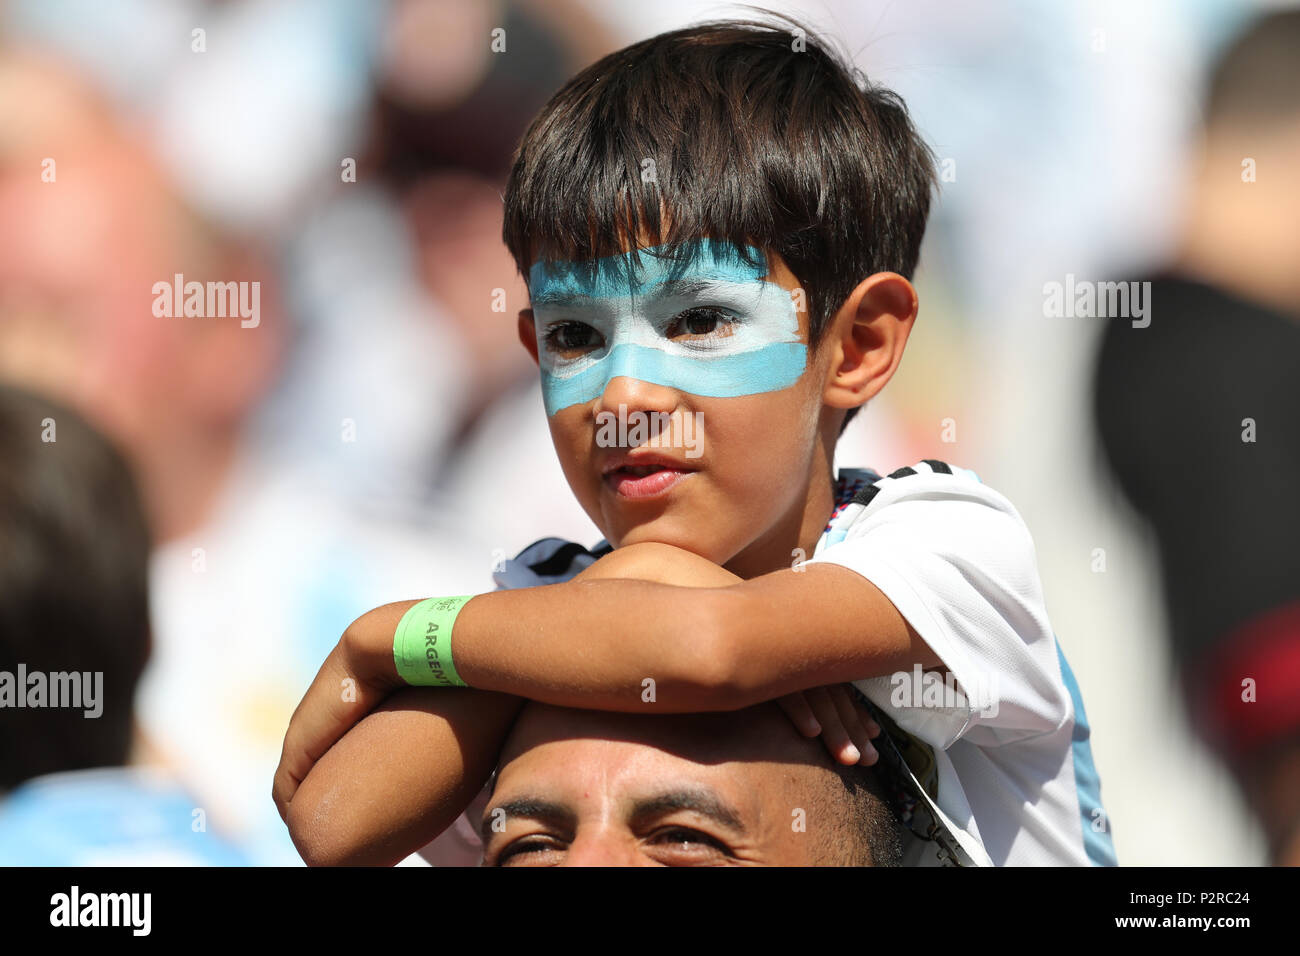 Young Argentina fan watching the game ARGENTINA V ICELAND ARGENTINA V ICELAND, 2018 FIFA WORLD CUP RUSSIA 16 June 2018 GBC8104 2018 FIFA World Cup Russia Spartak Stadium Moscow STRICTLY EDITORIAL USE ONLY. If The Player/Players Depicted In This Image Is/Are Playing For An English Club Or The England National Team. Then This Image May Only Be Used For Editorial Purposes. No Commercial Use. The Following Usages Are Also Restricted EVEN IF IN AN EDITORIAL CONTEXT: Use in conjuction with, or part of, any unauthorized audio, video, data, fixture lists, club/league logos, Betting, Stock Photo